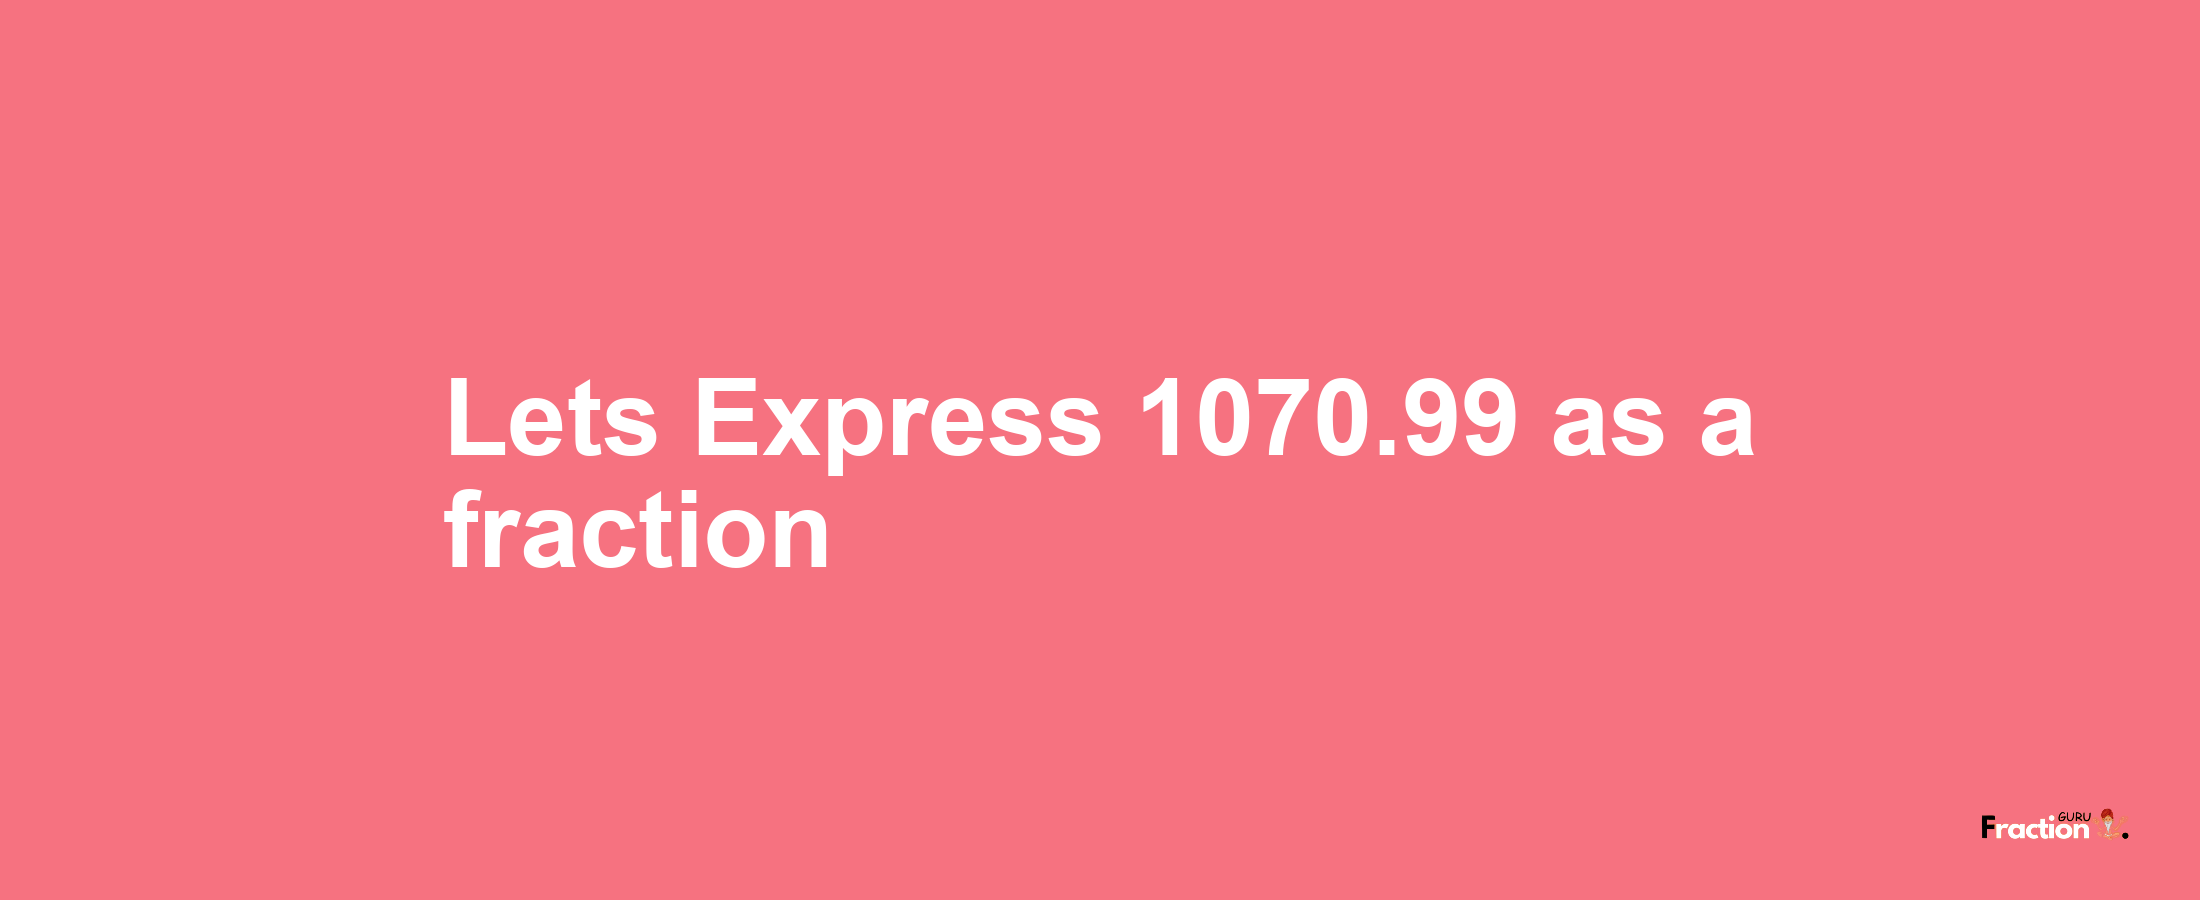 Lets Express 1070.99 as afraction